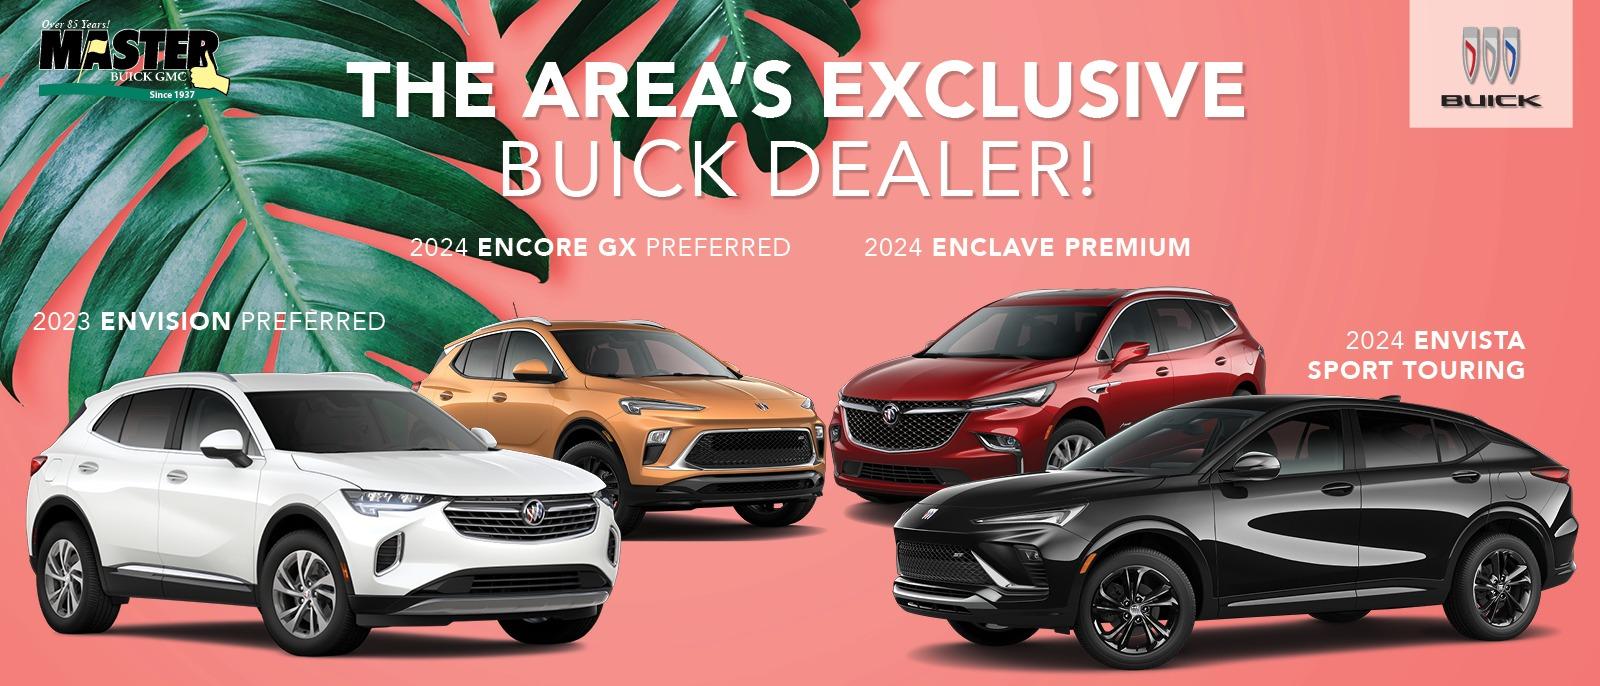 The Area's Exclusive Buick Dealer